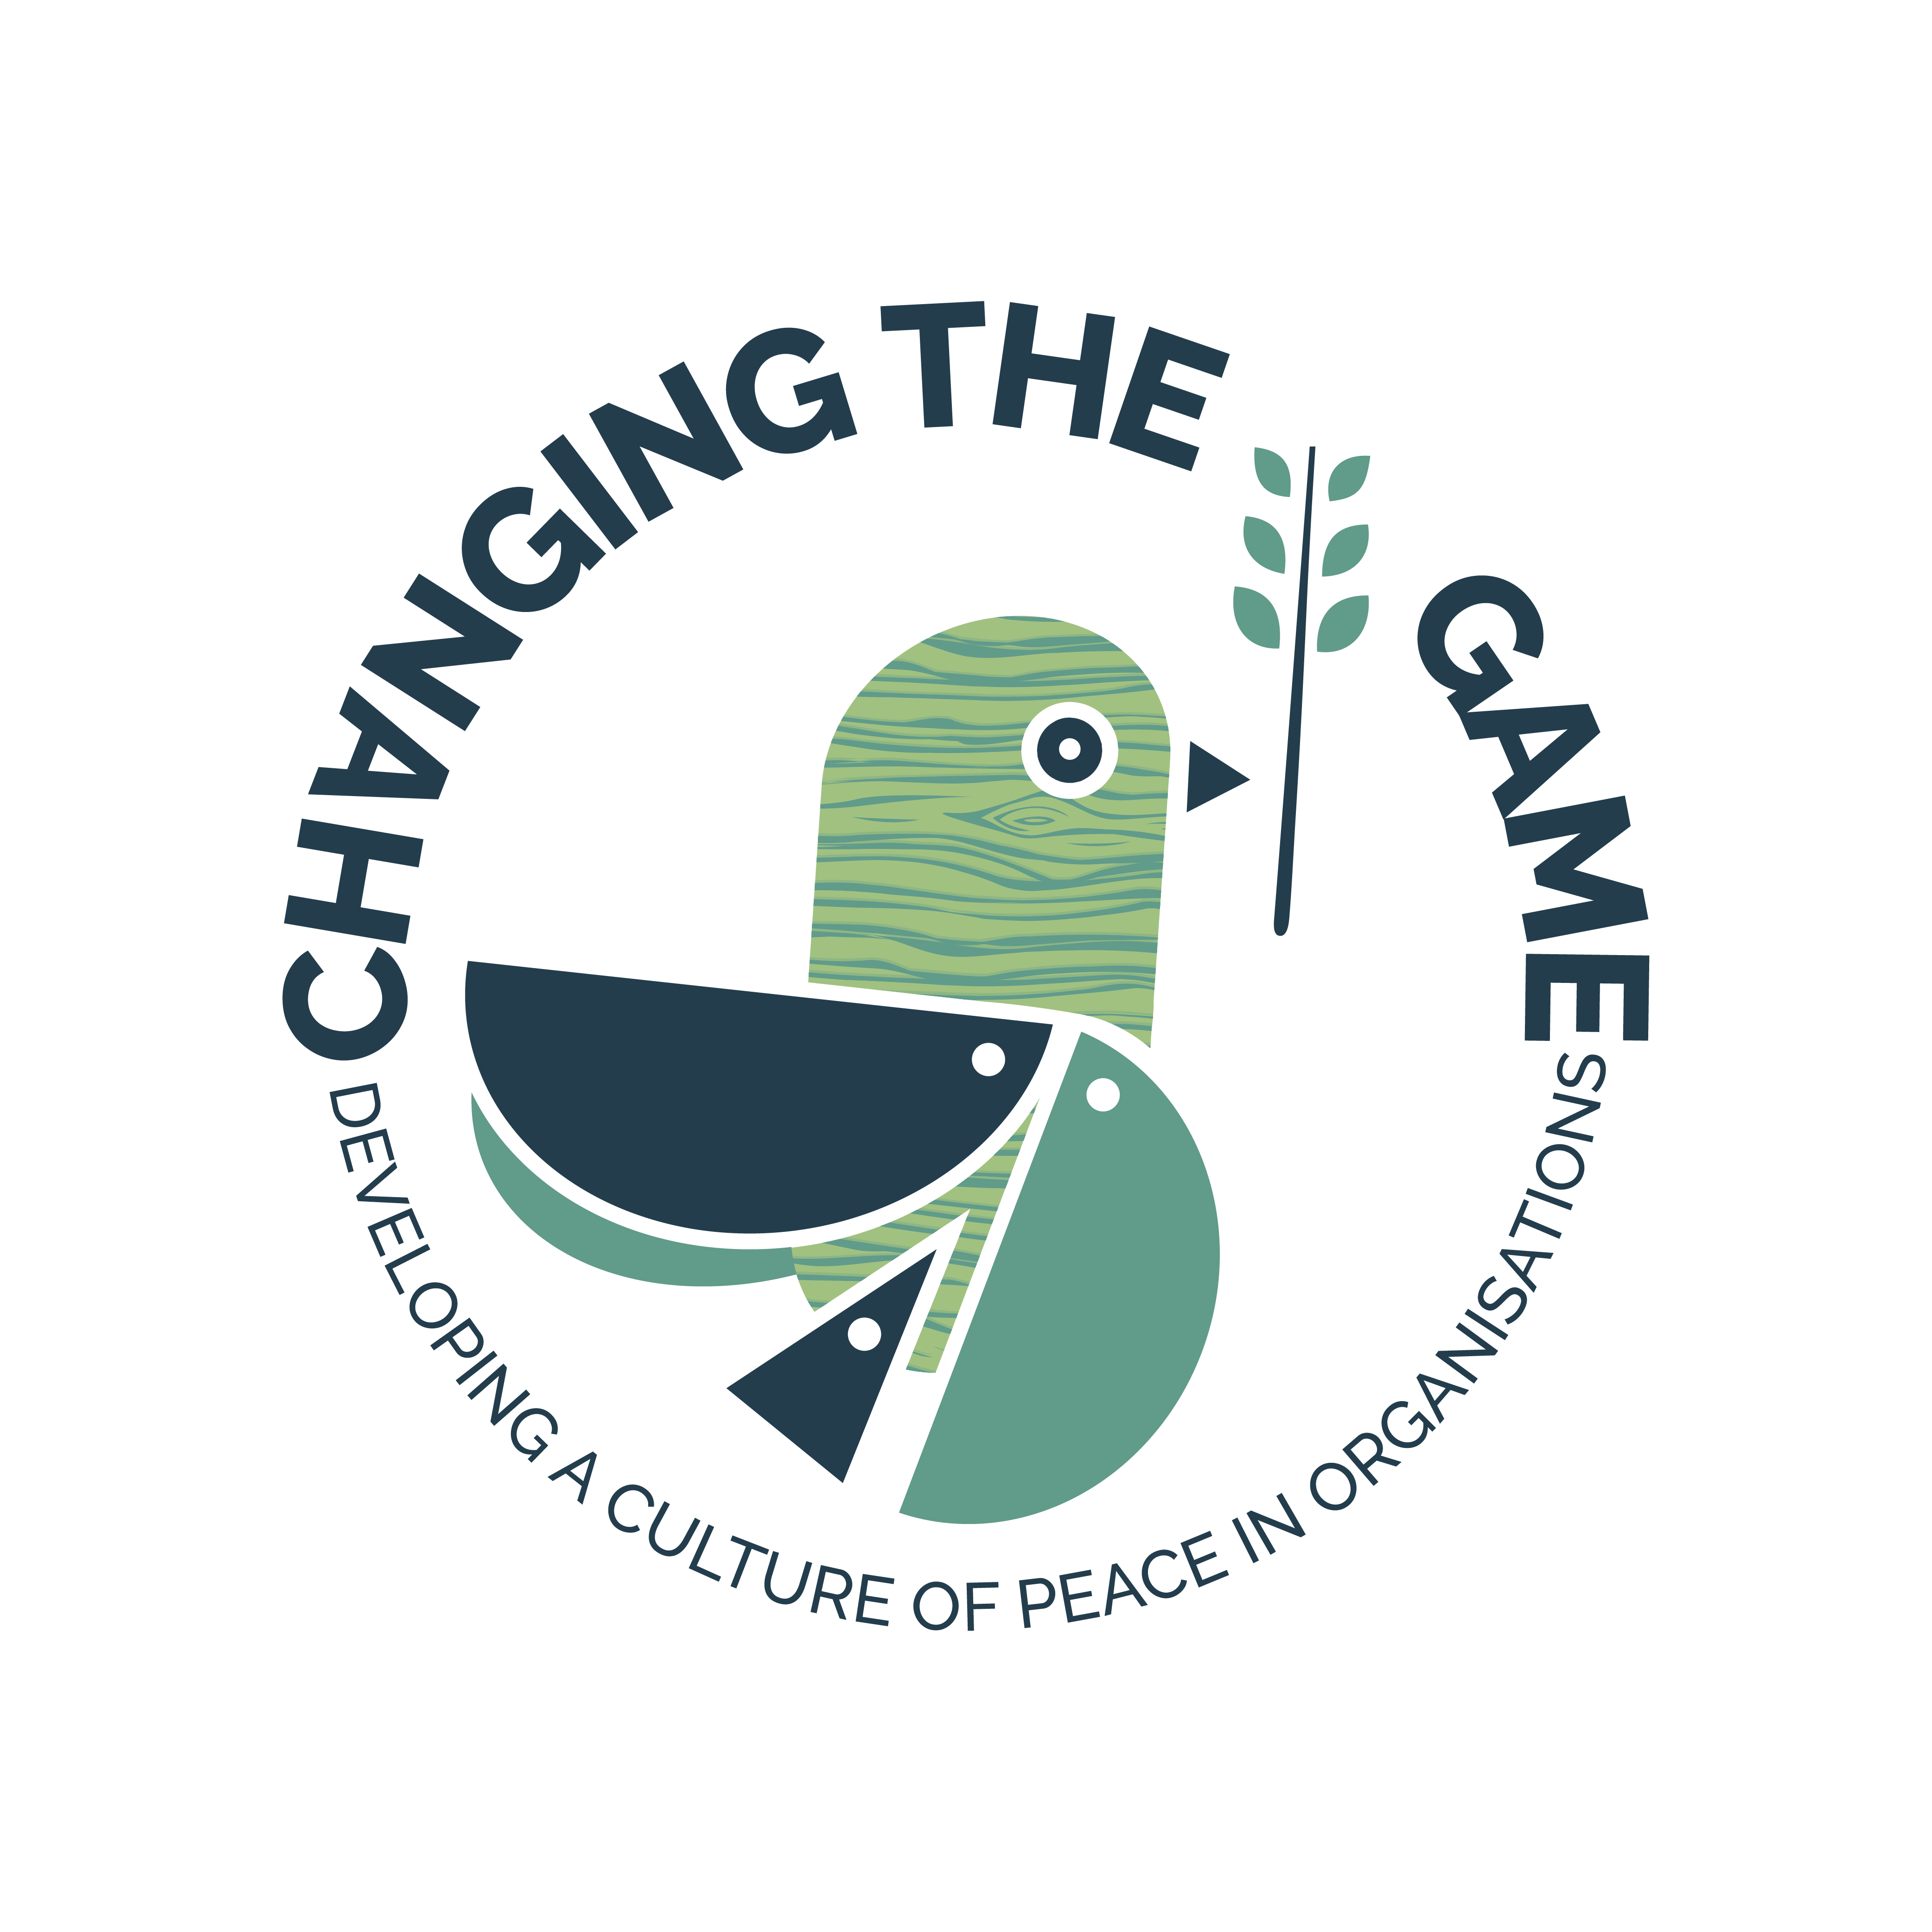 https://www.addart.gr/project/changing-the-game-developing-a-culture-of-peace-in-organisations/